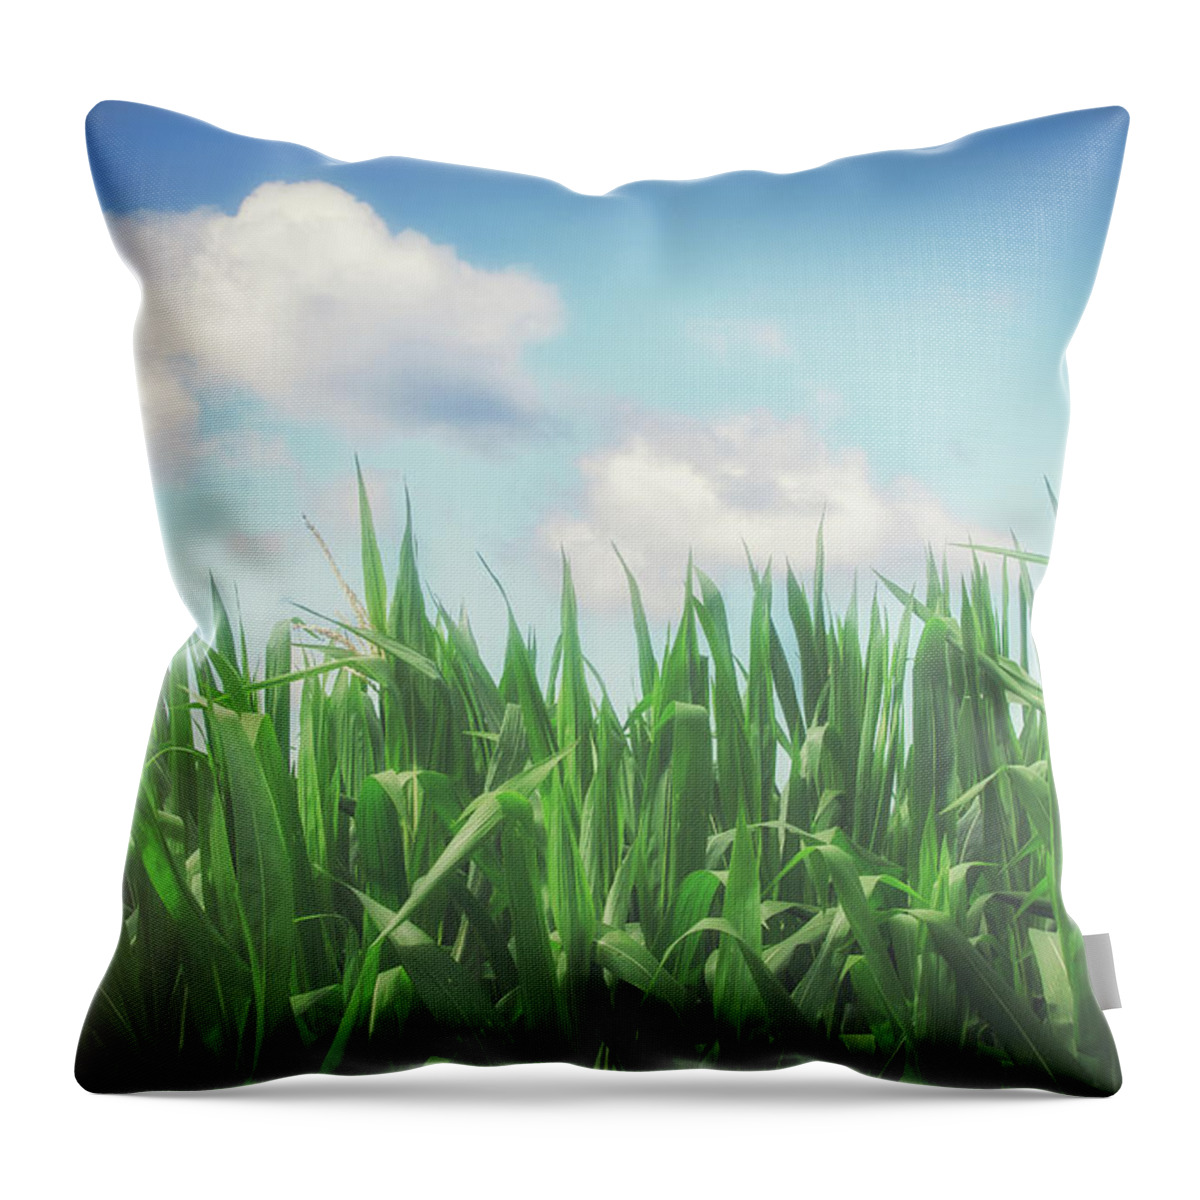 Landscape Throw Pillow featuring the photograph Field Of Corn by Bob Orsillo